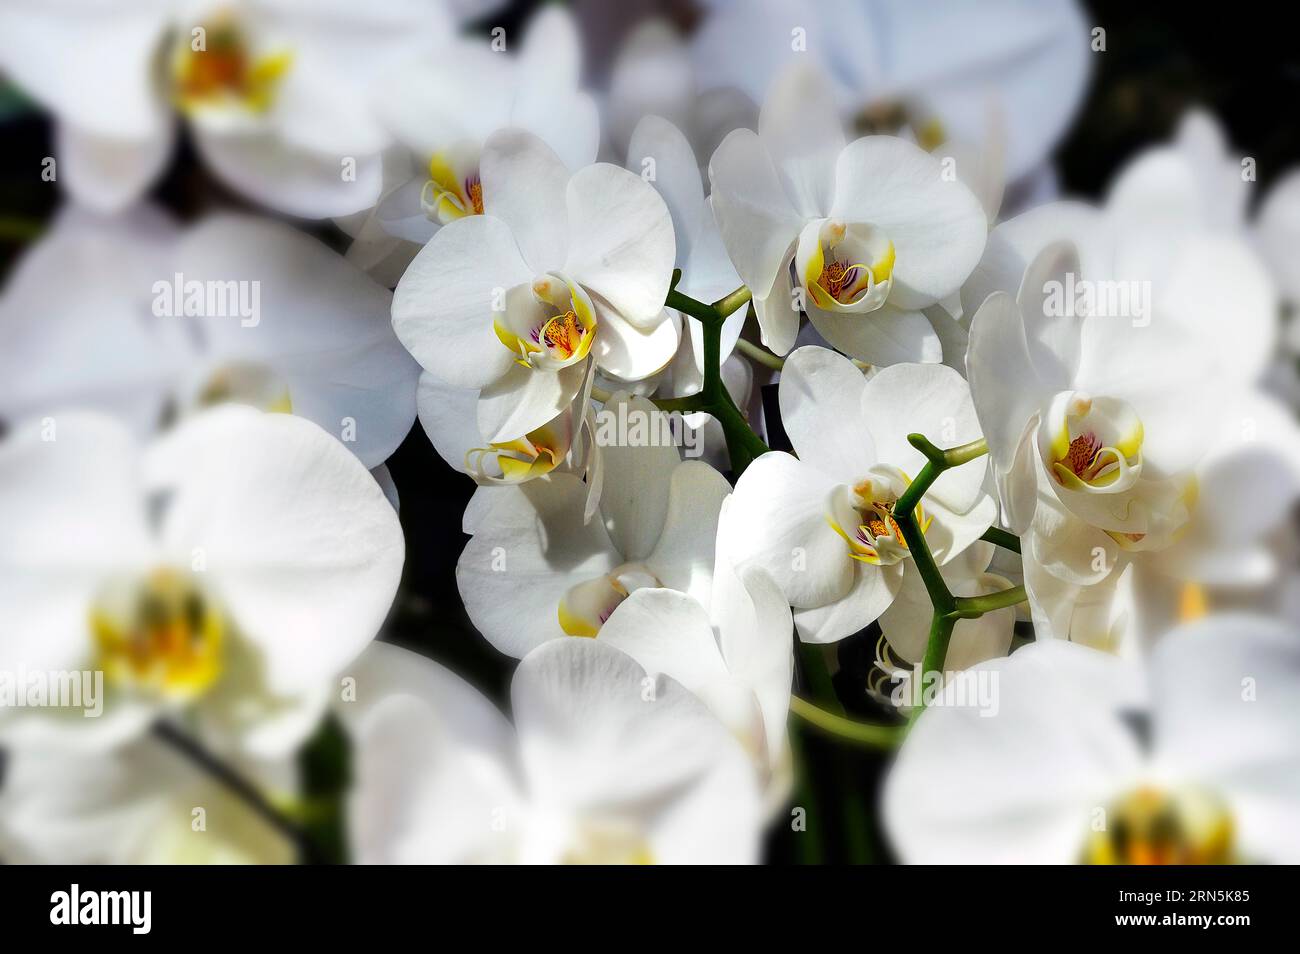 Butterfly orchid (Phalaenopsis hybrid), in a garden centre, Allgaeu, Bavaria, Germany Stock Photo